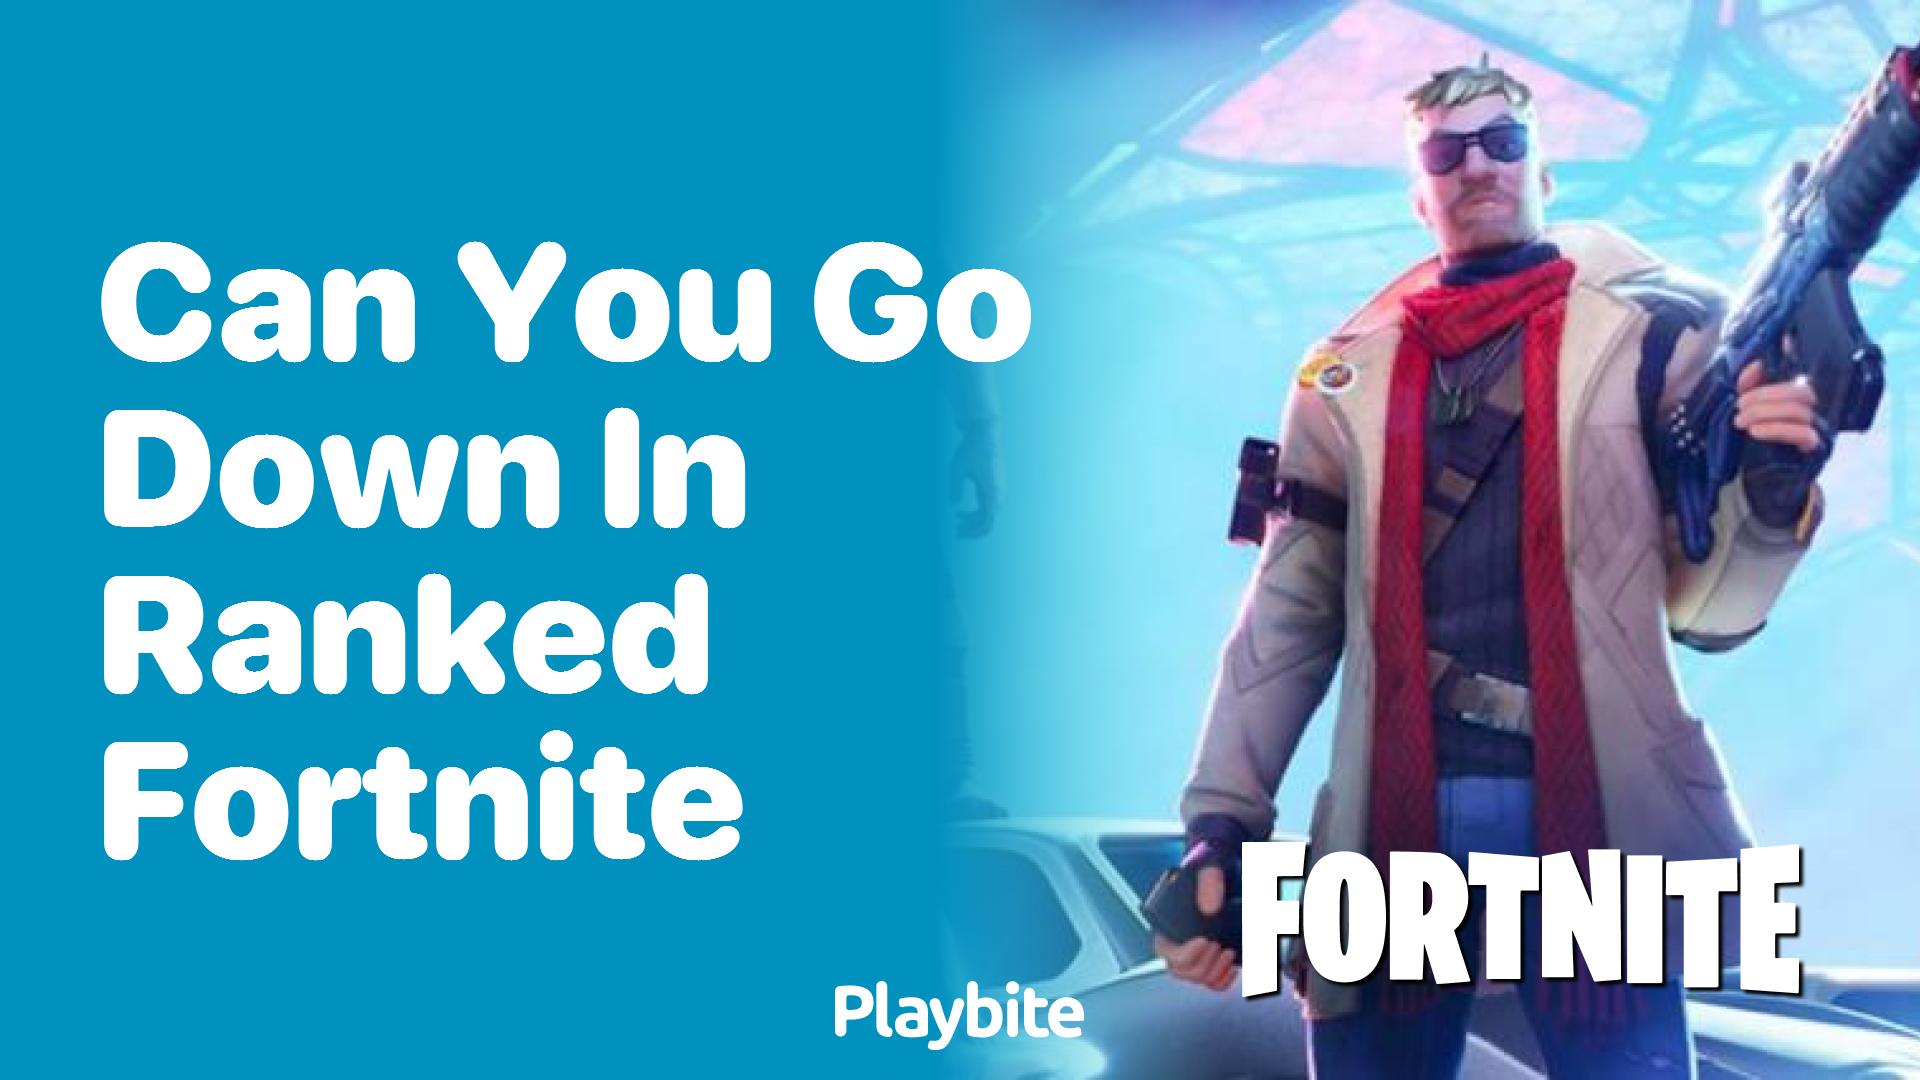 Can You Go Down in Ranked Fortnite? Here&#8217;s What You Need to Know